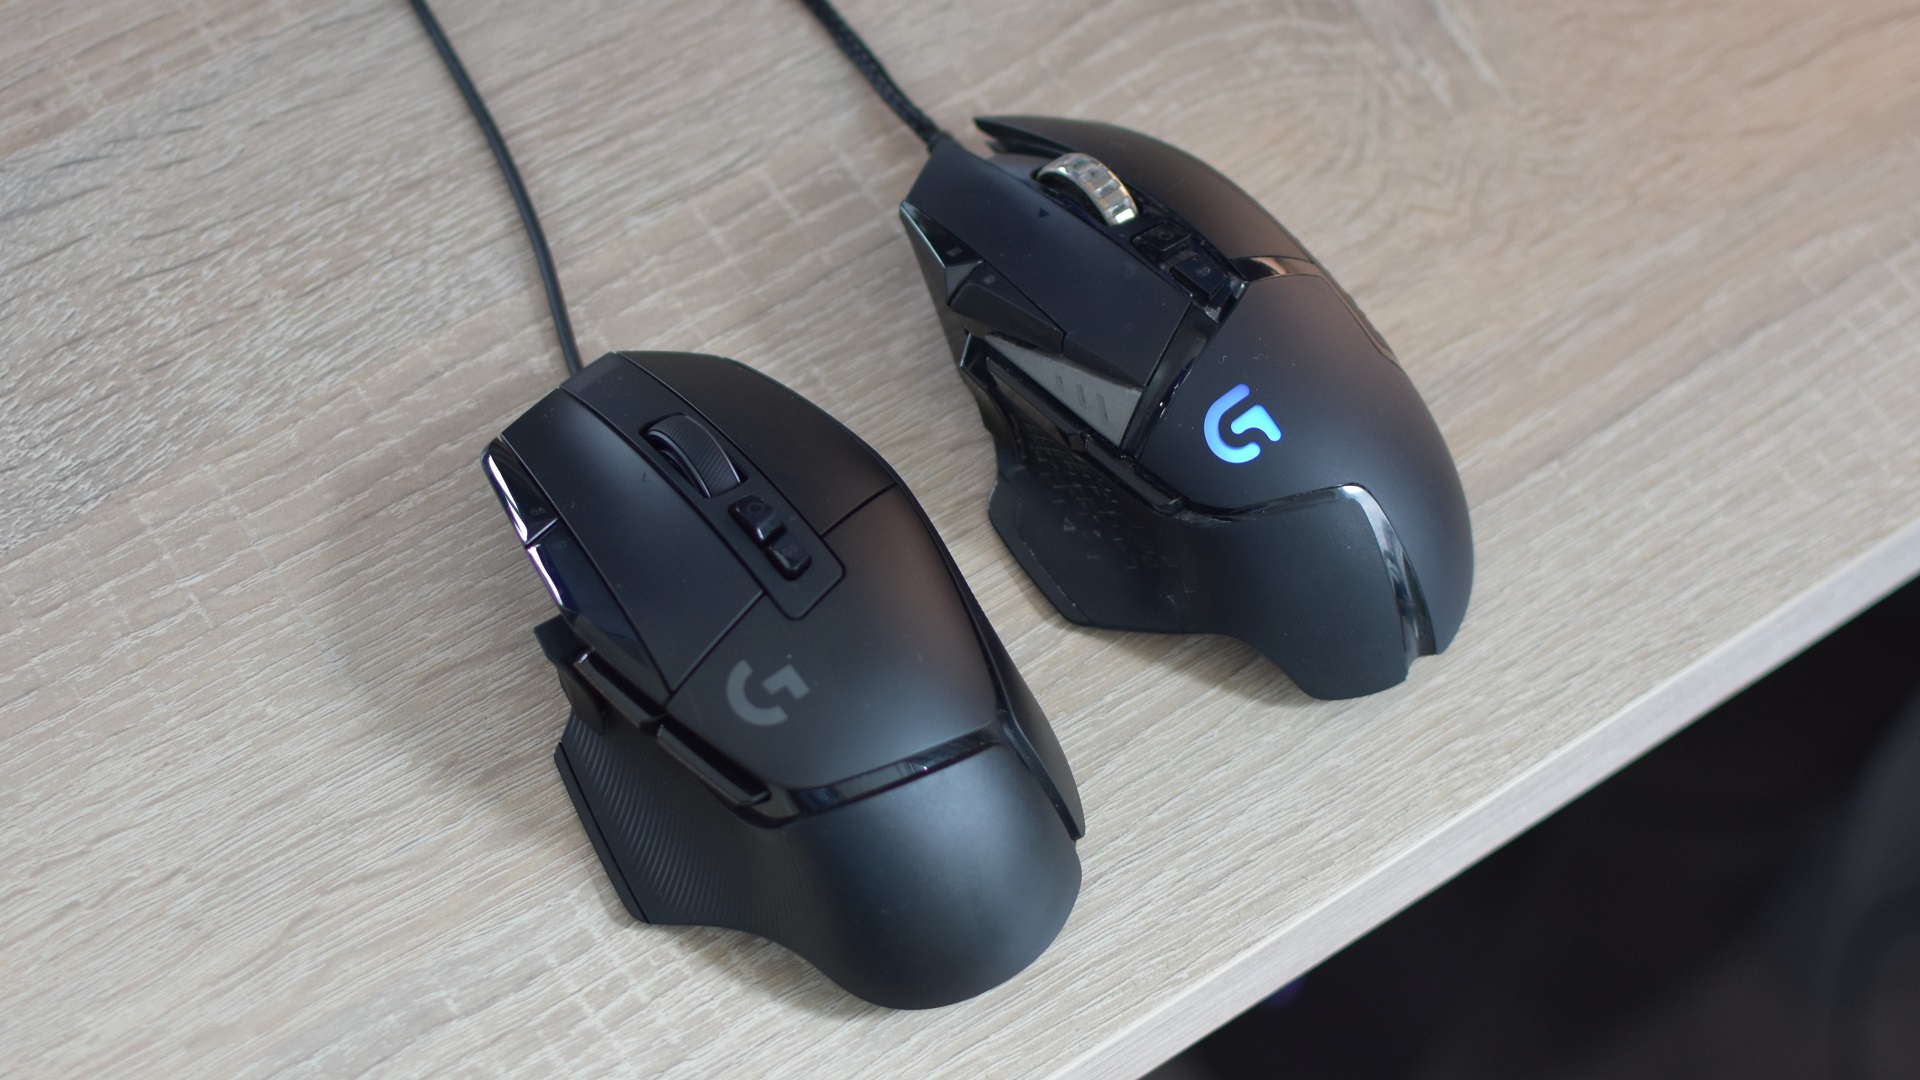 The Logitech G502 X gaming mouse next to a G502 Proteus Spectrum on a desk.